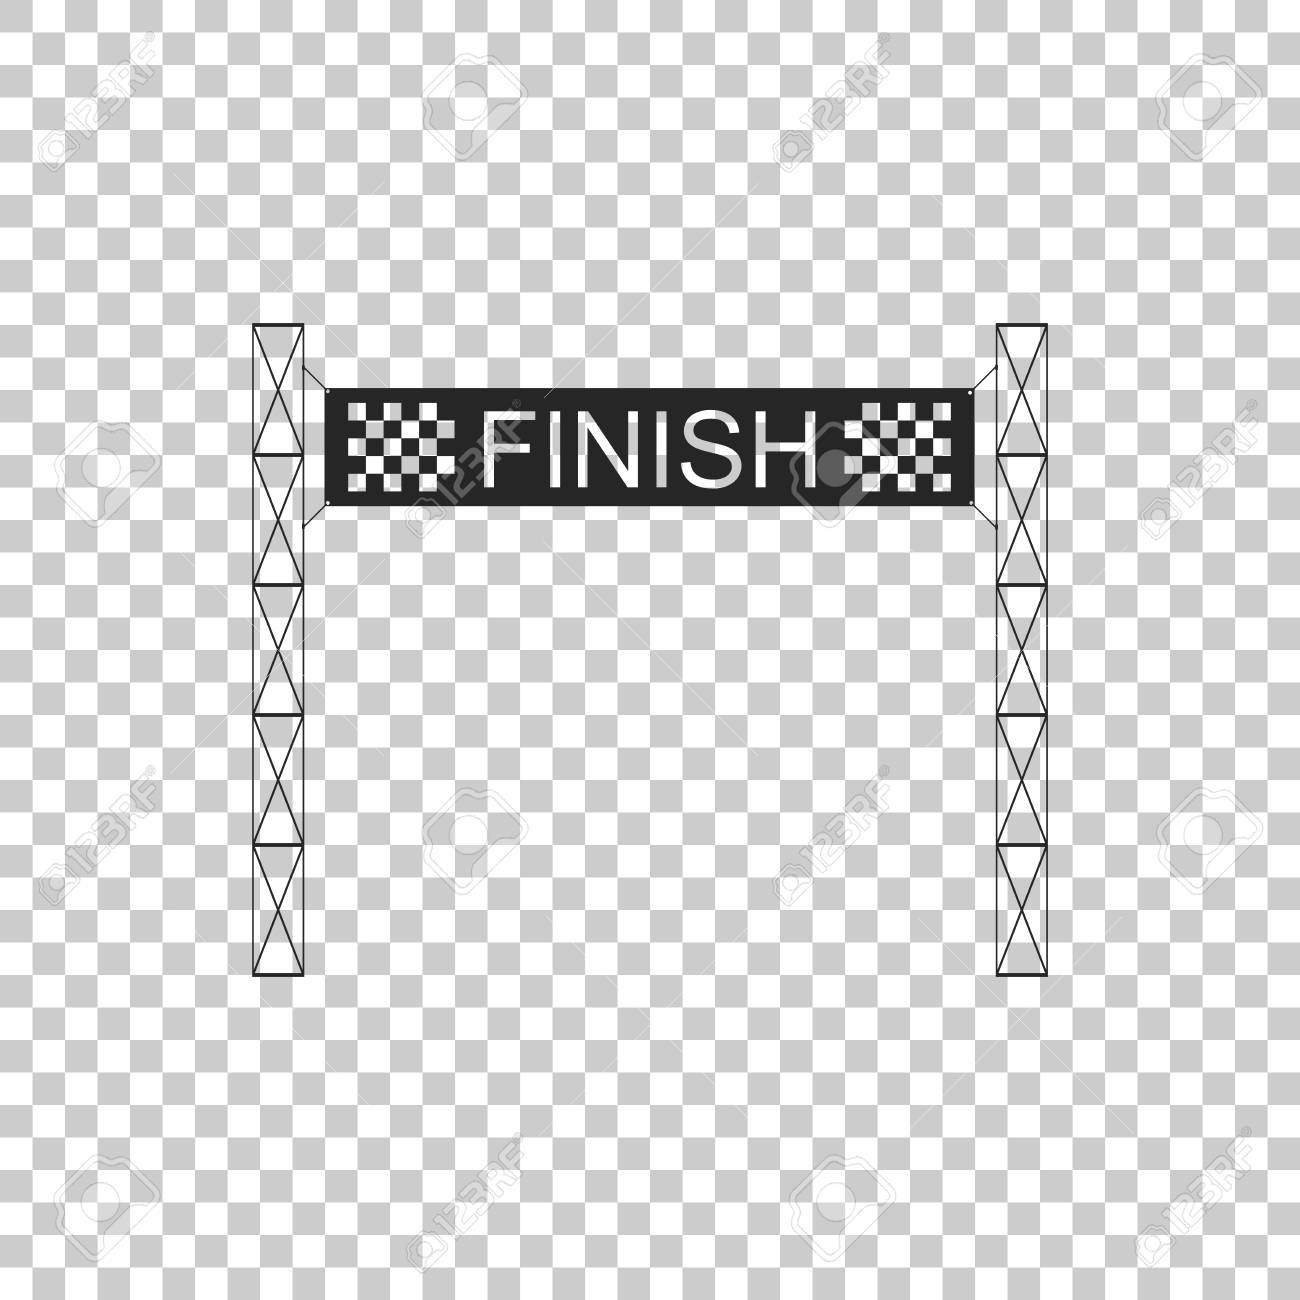 Ribbon In Finishing Line Icon Isolated On Transparent Background